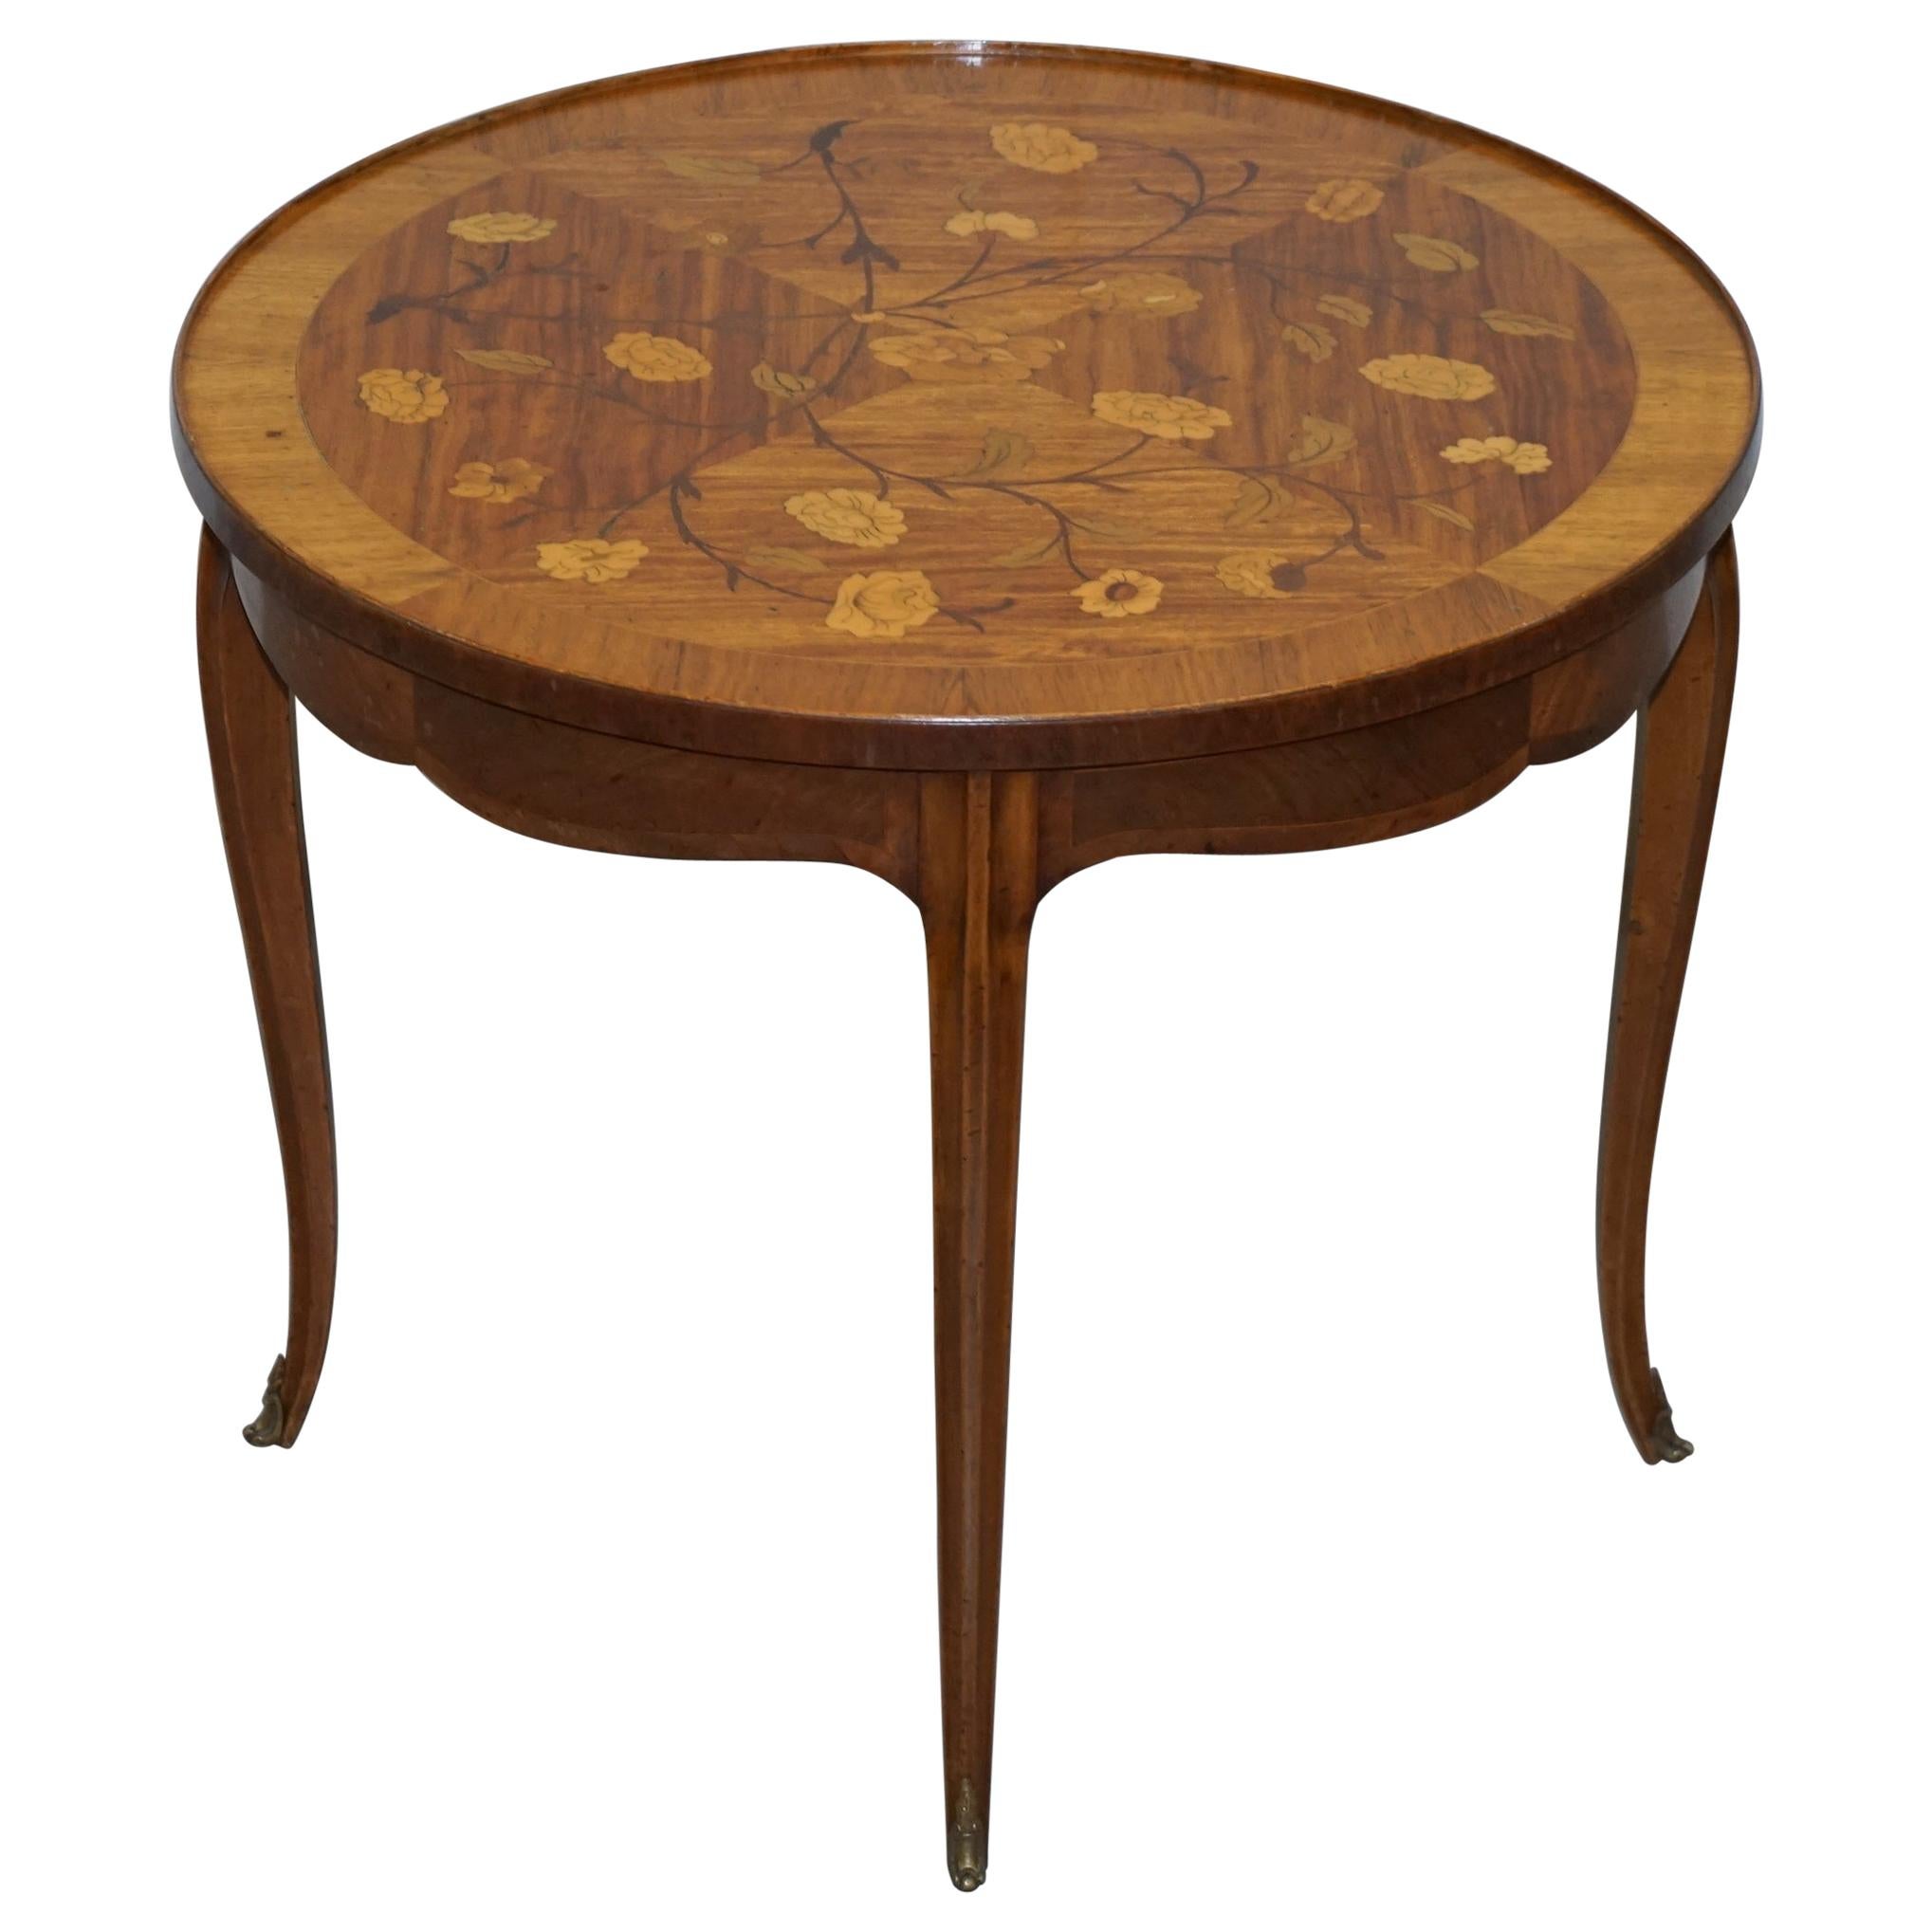 Sublime circa 1900 Italian Marquetry Inlaid in Centre Occasional Table Bronze